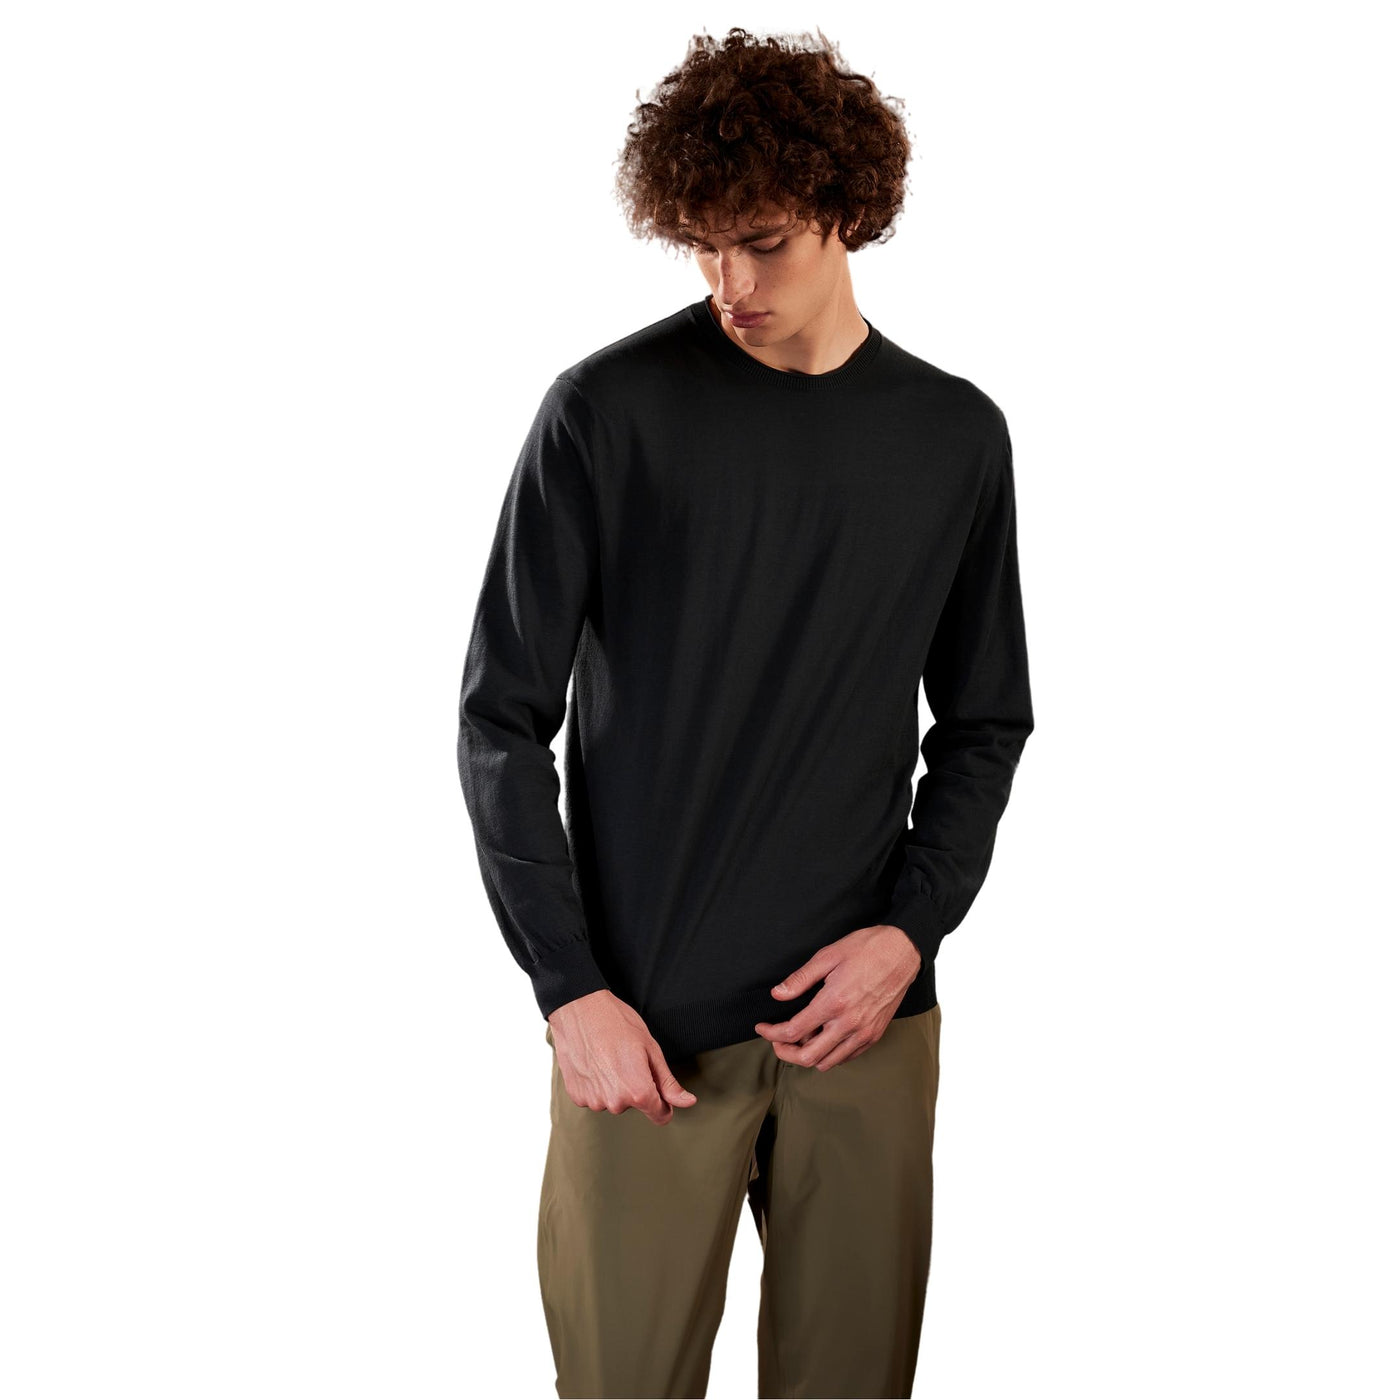 Solid color men's sweater in smooth fabric